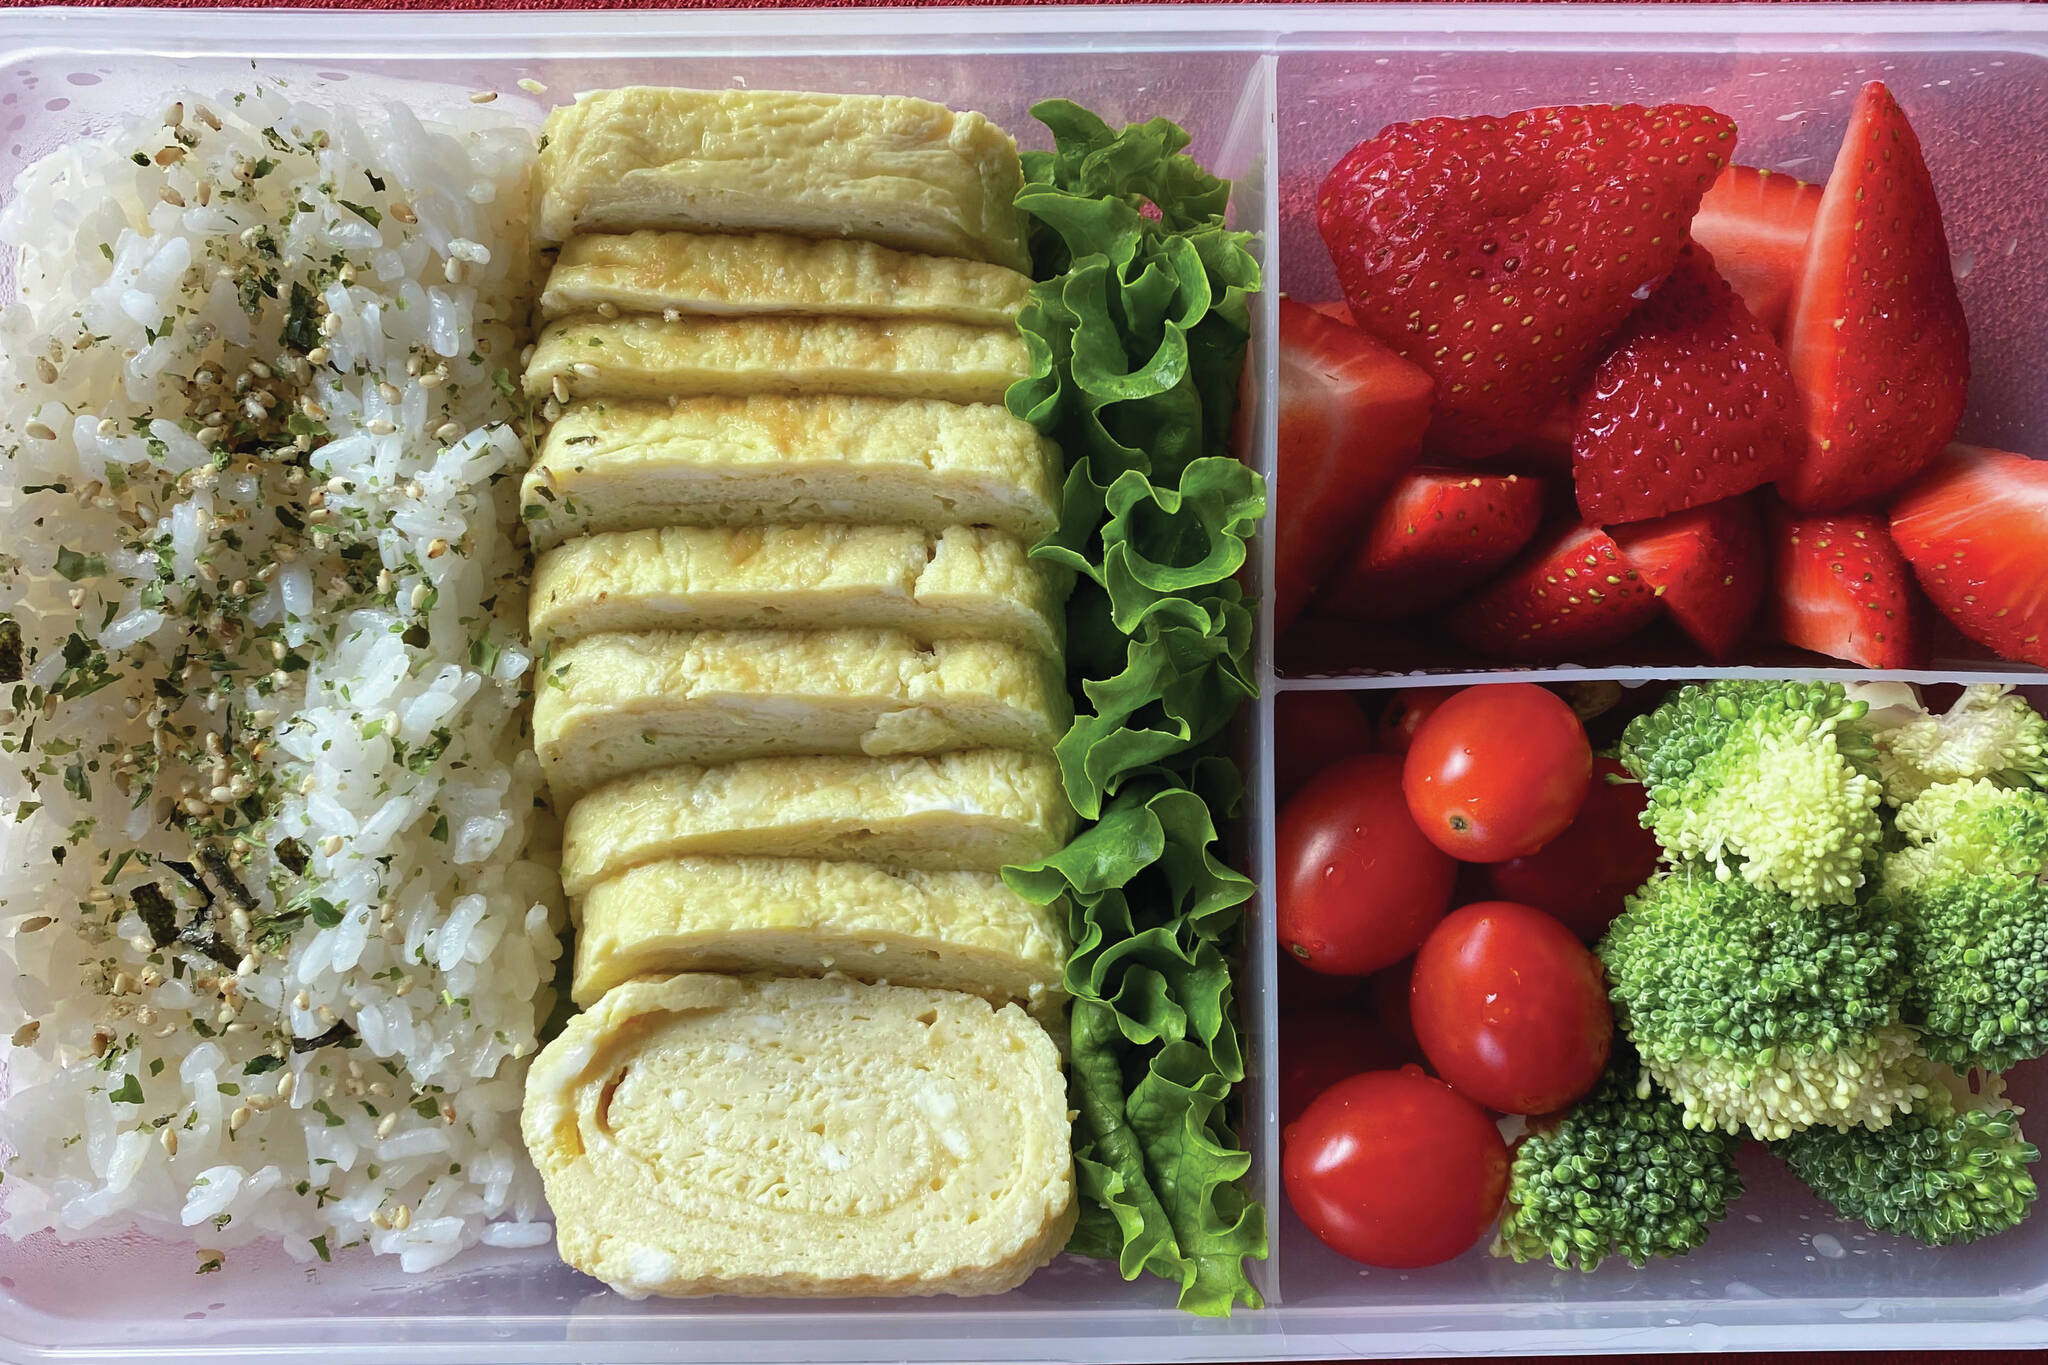 This bento box includes rice, fruit, vegetables and tomagoyaki, or Japanese rolled omelet. (Photo by Tressa Dale/Peninsula Clarion)